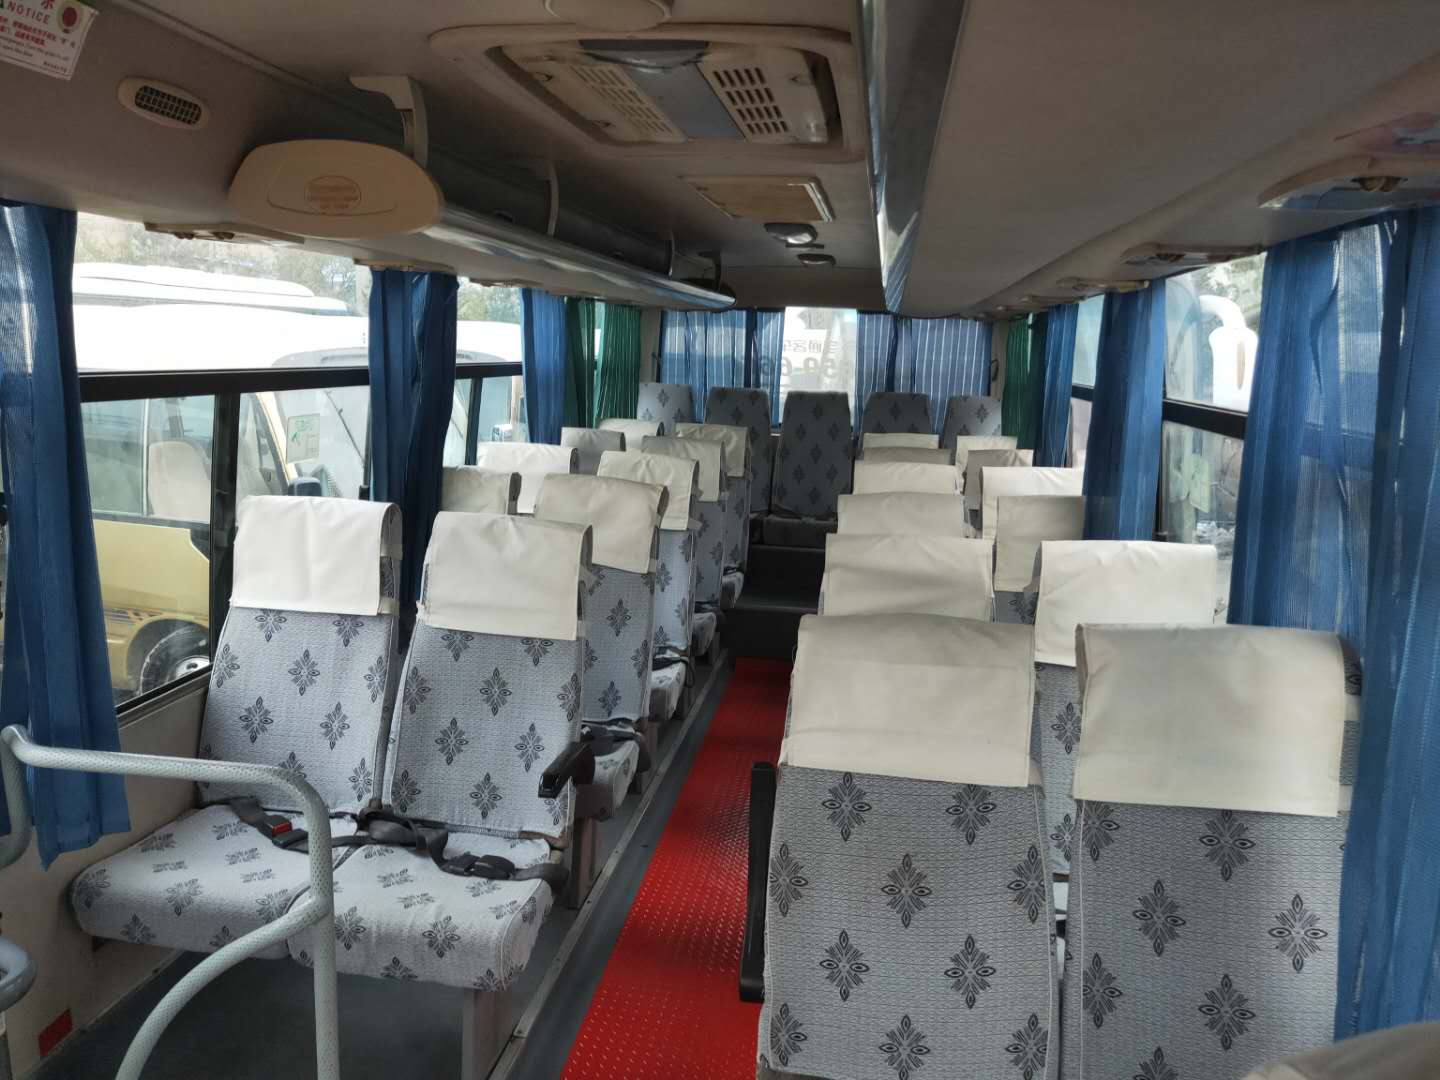 Quality used yutong bus 2015 year China made yutong 29 seats/50 seats big bus for sale in China wholesale